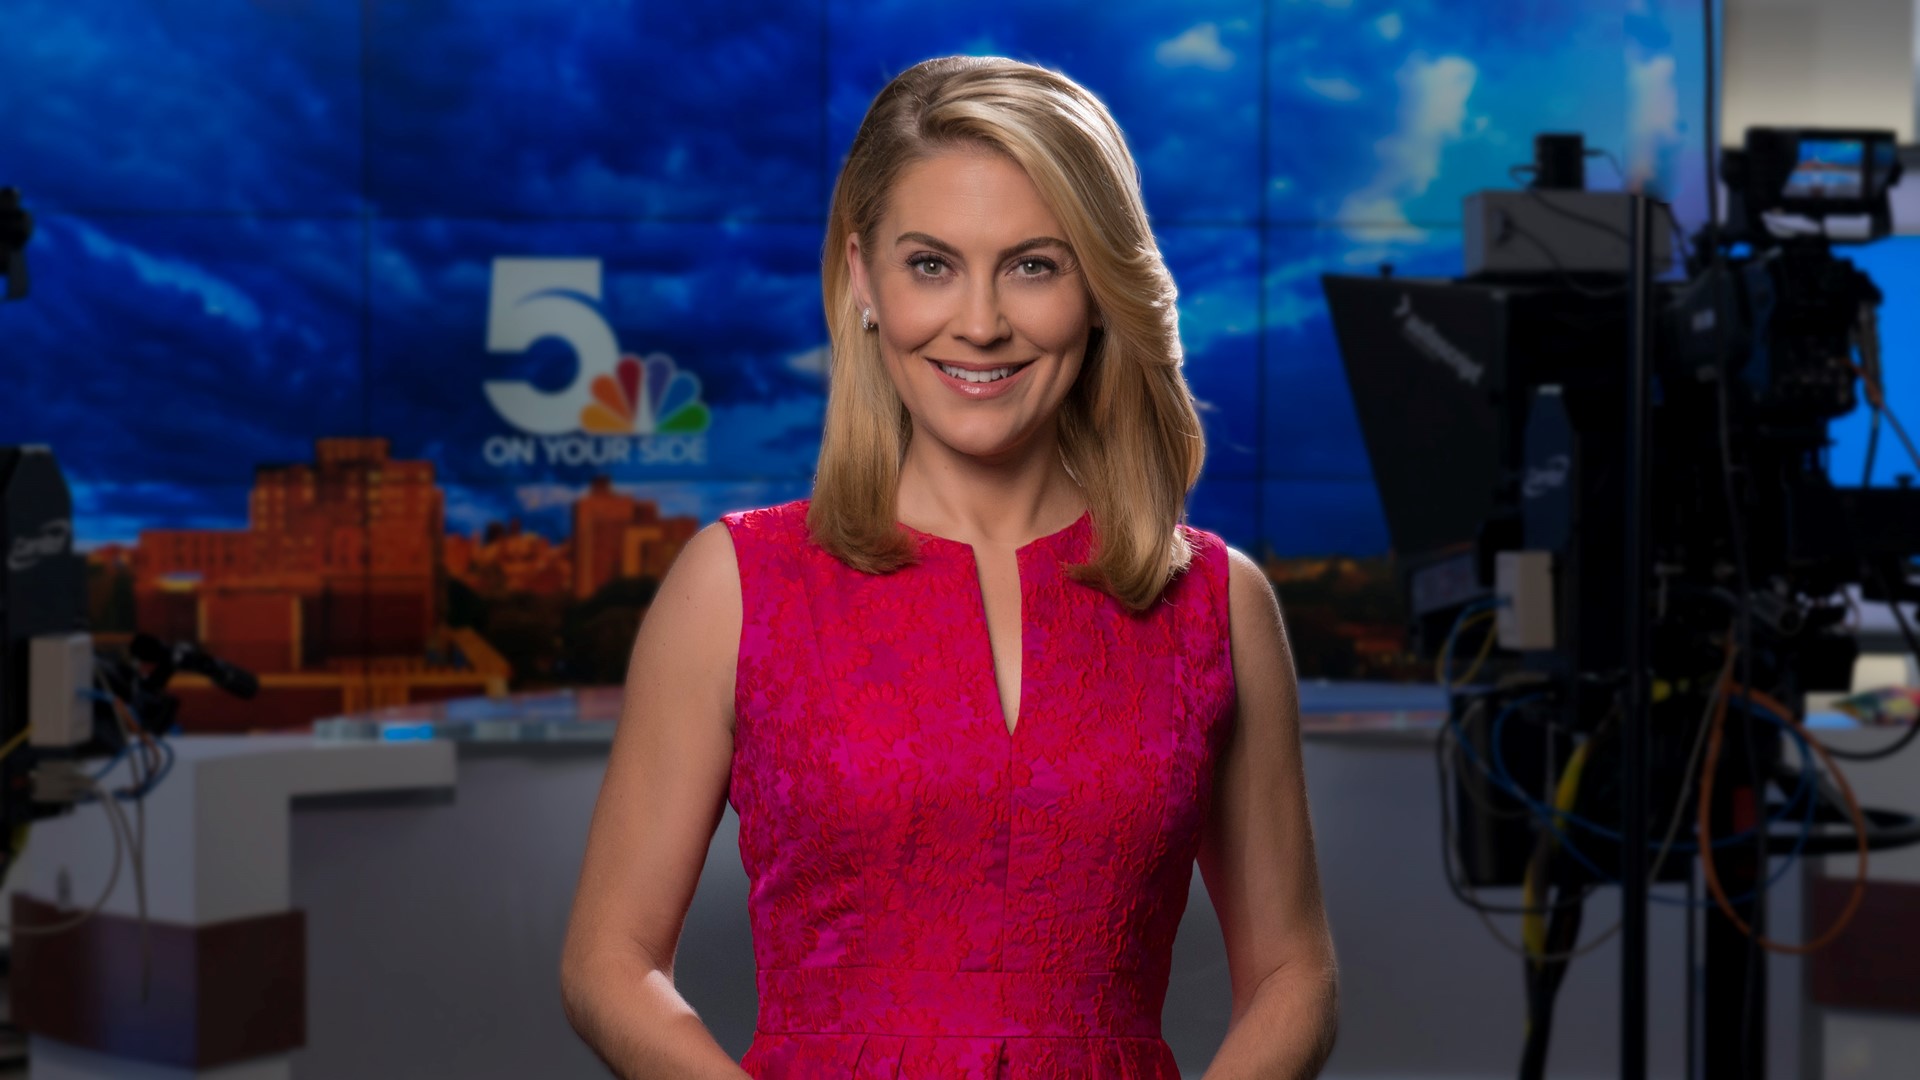 Award-winning anchor and reporter Anne Allred is celebrating a decade with 5 On Your Side. The St. Louis native has been a familar face inside your home.